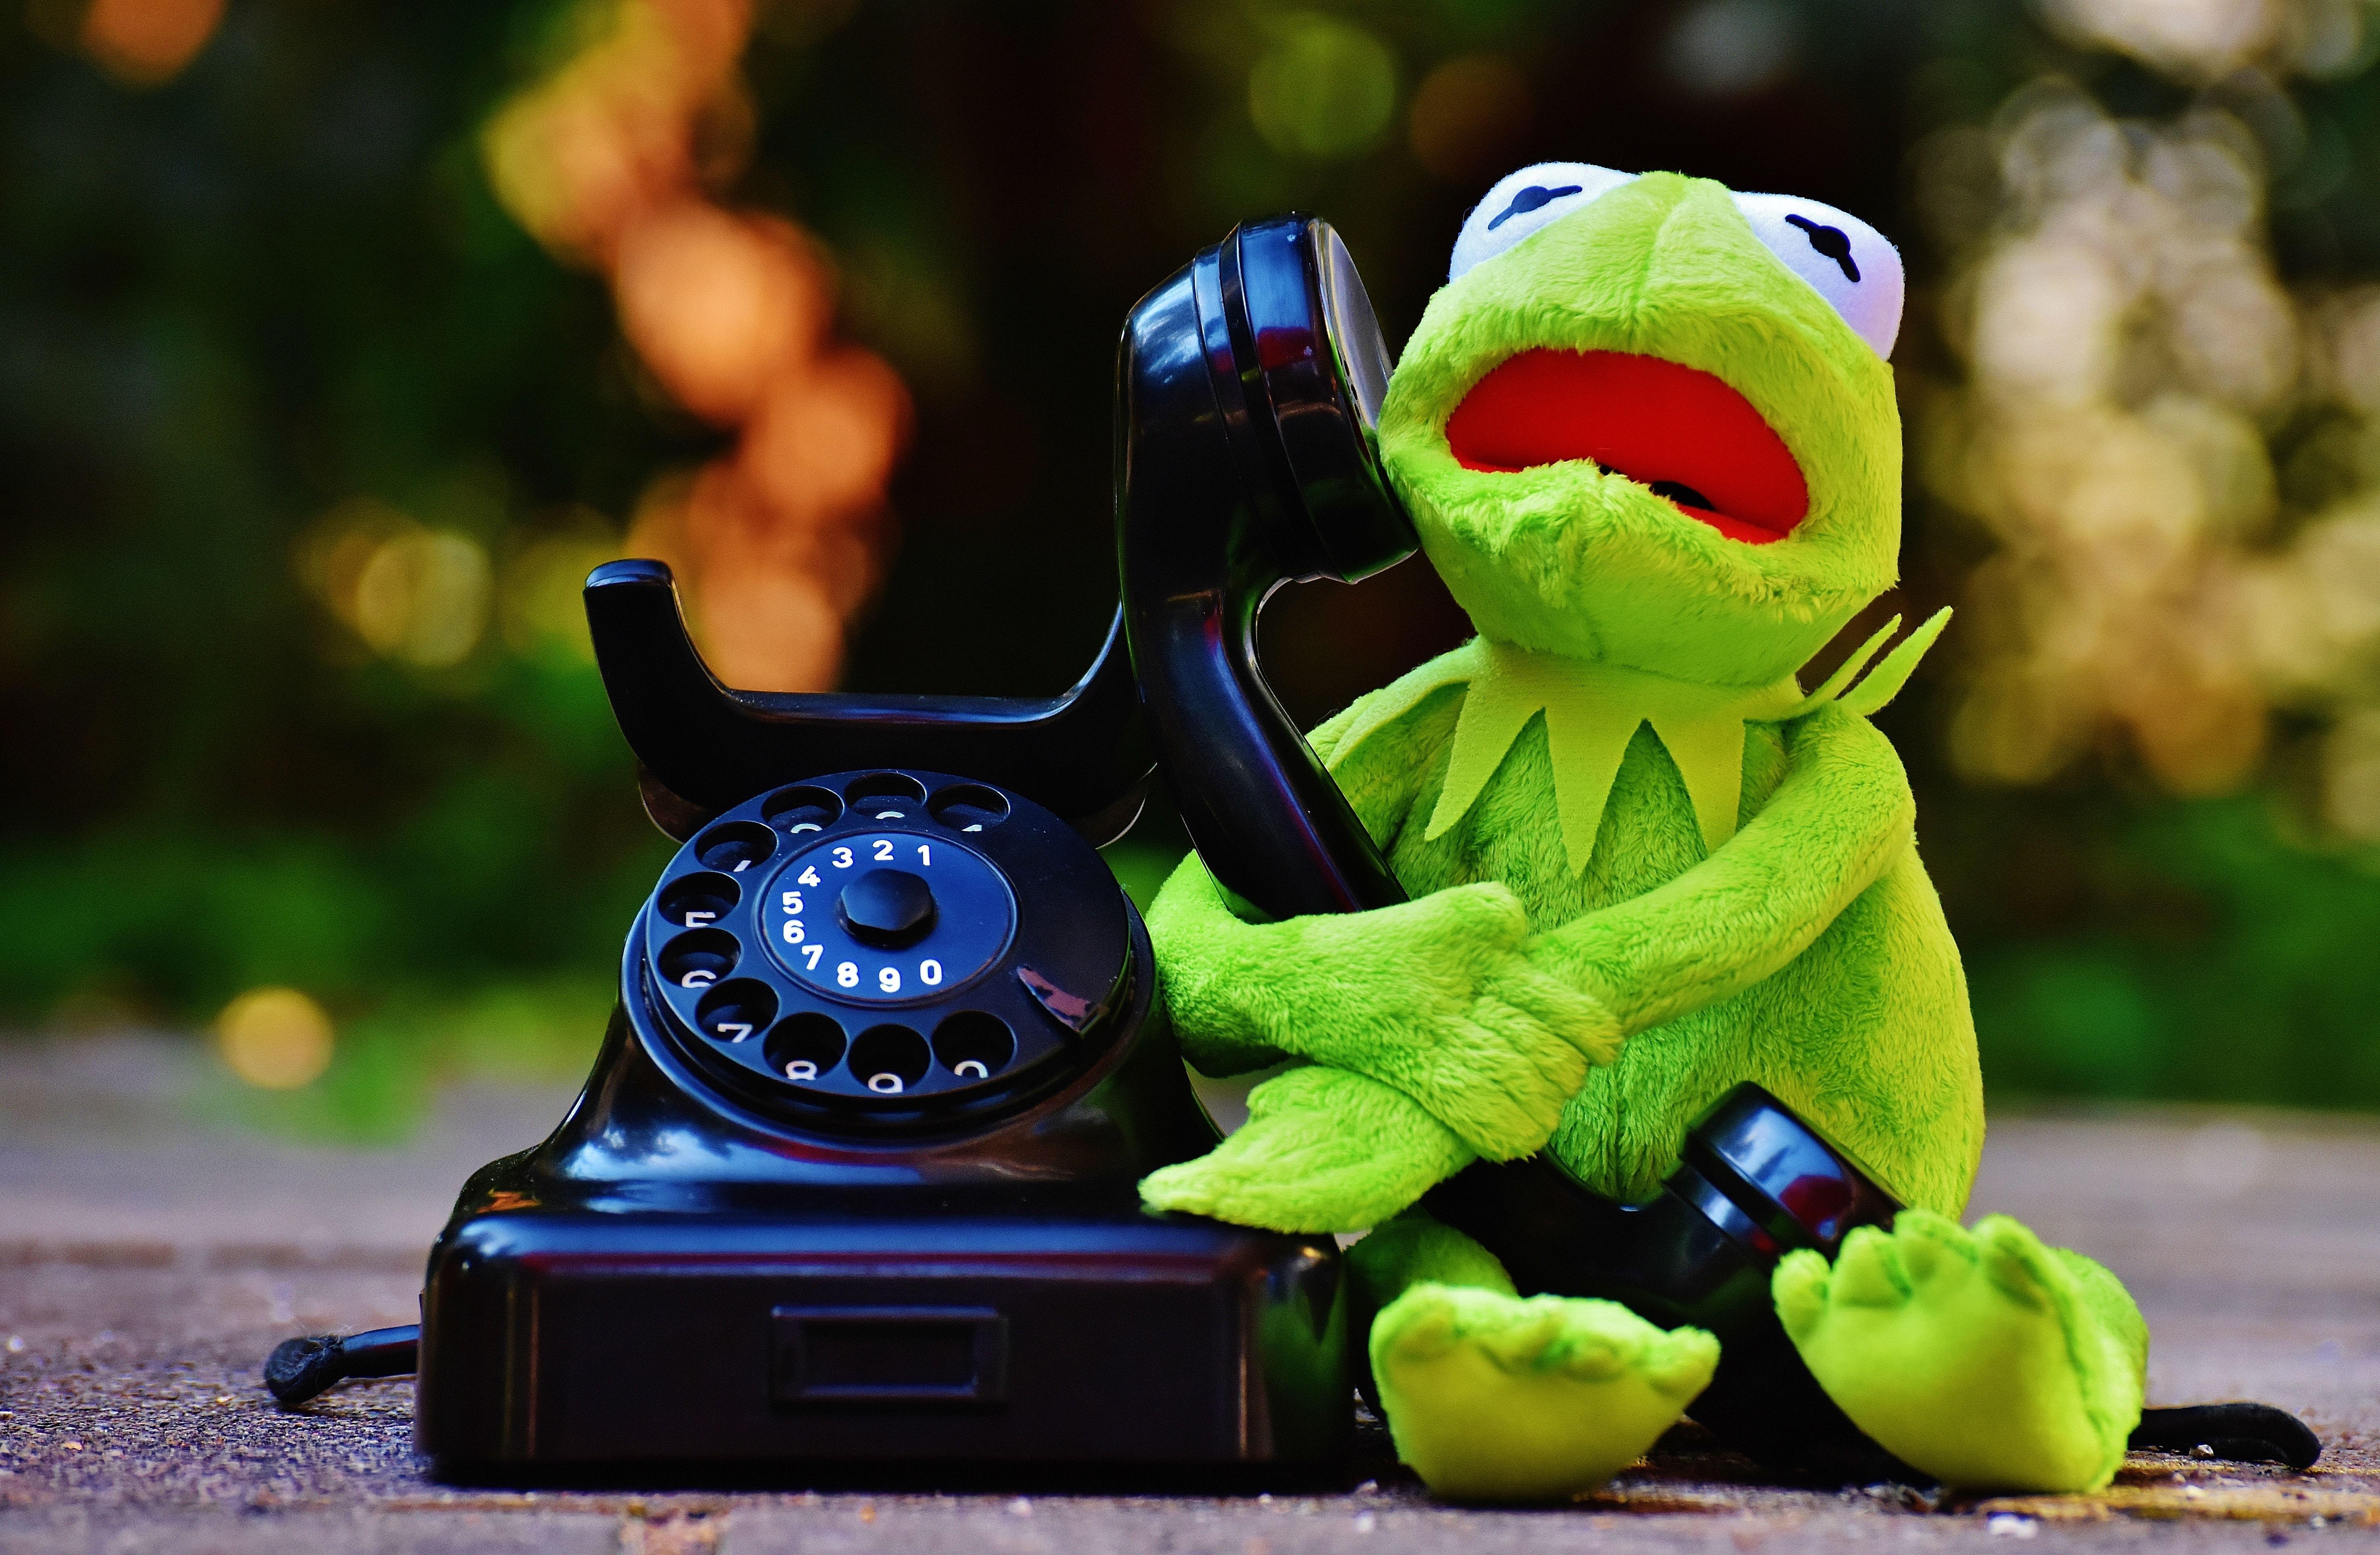 kermit the frog and rotary phone free image